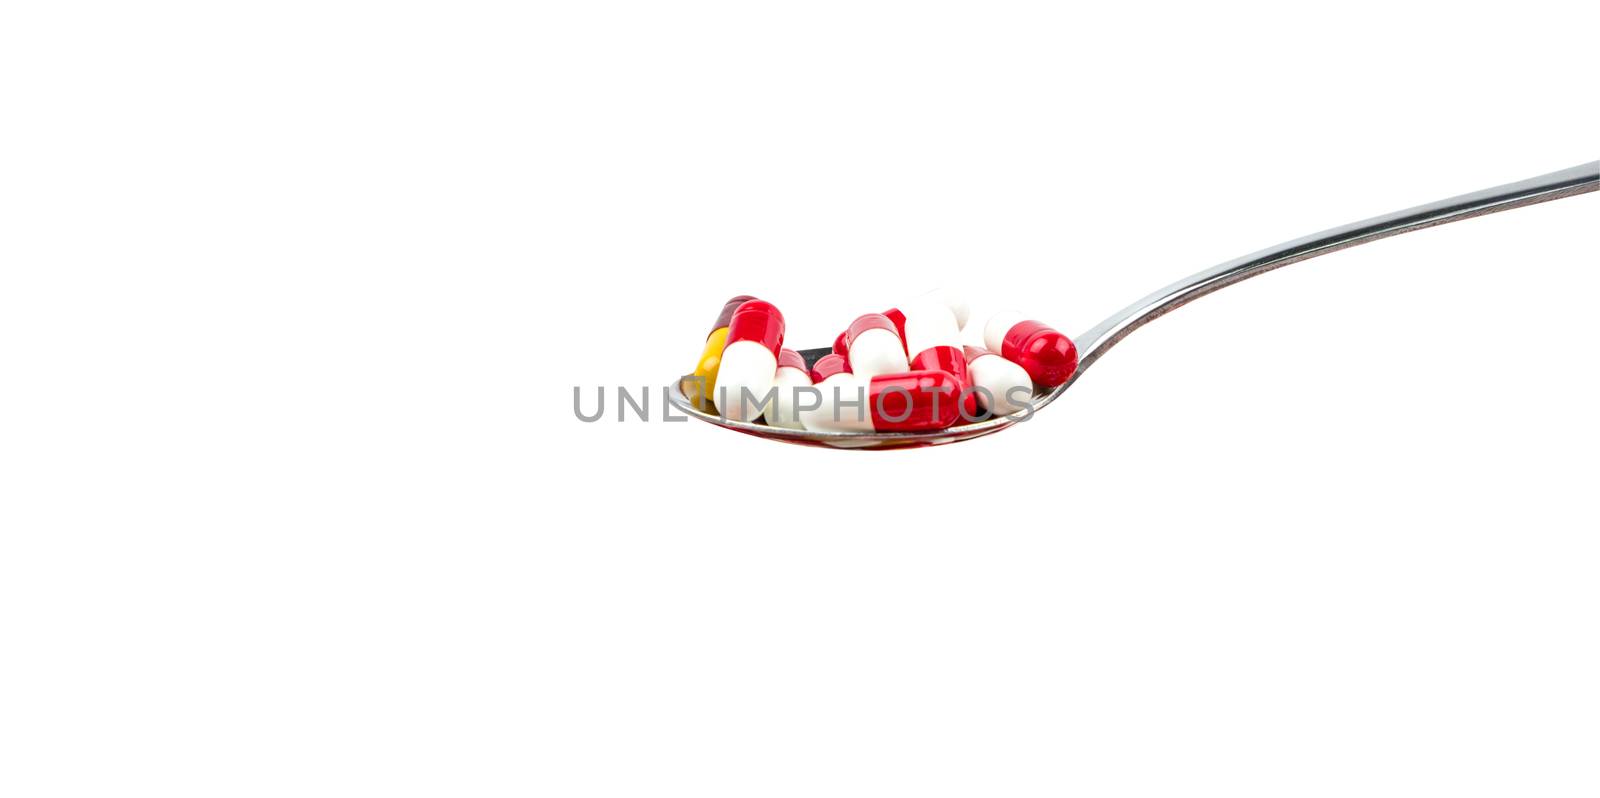 Antibiotic capsule pills in stainless steel spoon isolated on background with copy space. Drug resistance concept. Antibiotics drug use with reasonable and global healthcare concept.